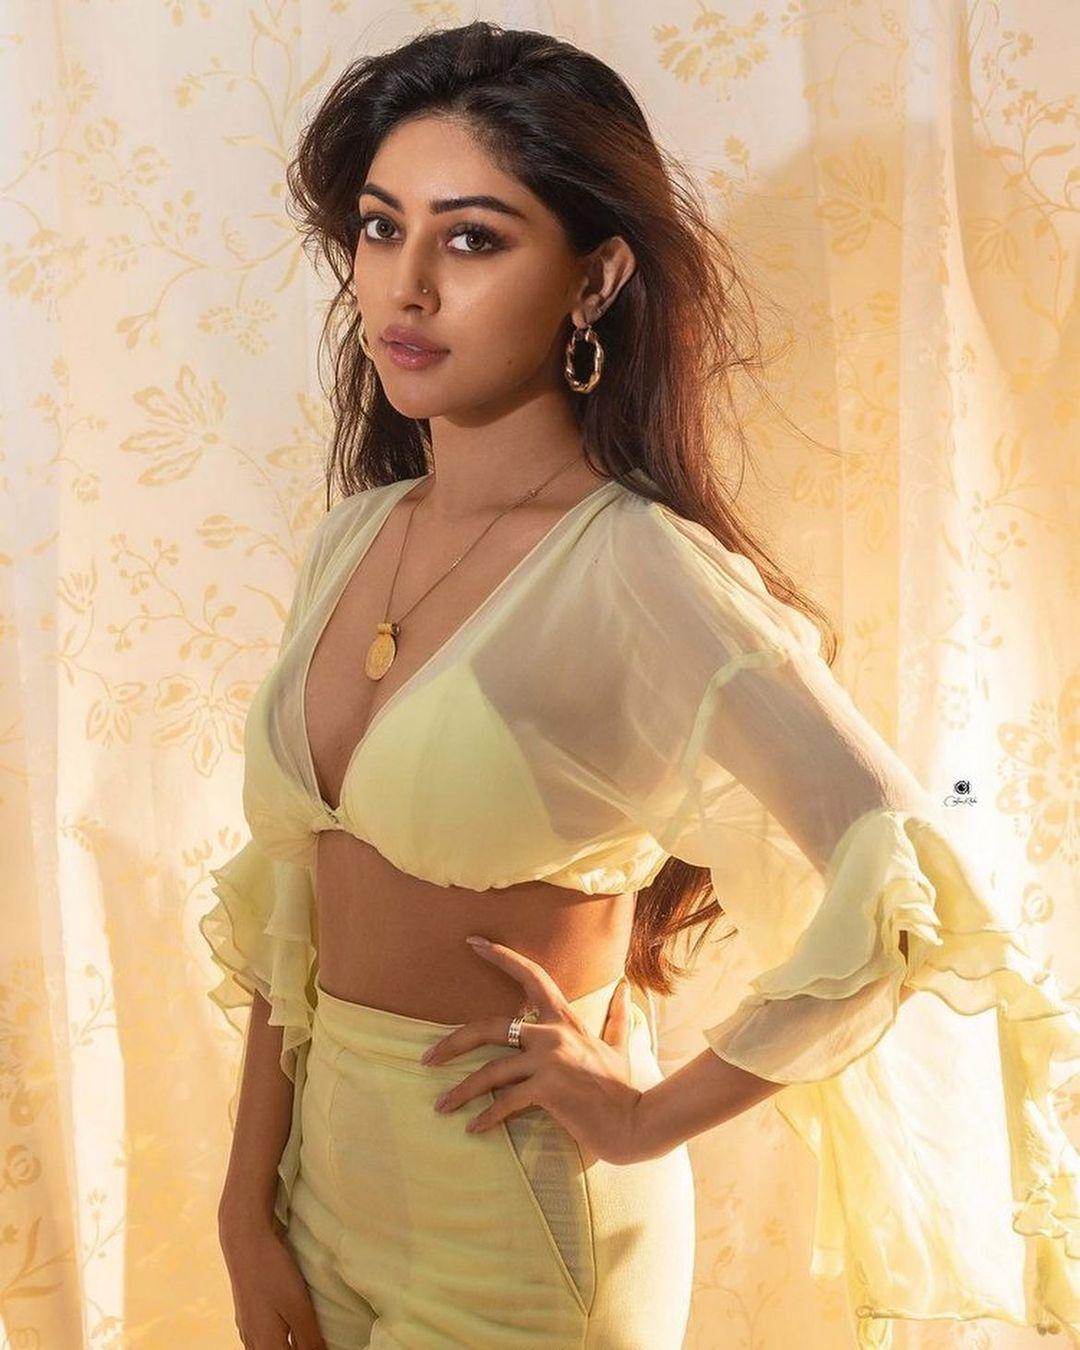 Divya Spandana Nude - Anu Emmanuel exposing cleavage in transparent yellow dress hot photos |Anu  Emmanuel latest hot and sexy photoshoot Photos: HD Images, Pictures,  Stills, First Look Posters of Anu Emmanuel exposing cleavage in transparent